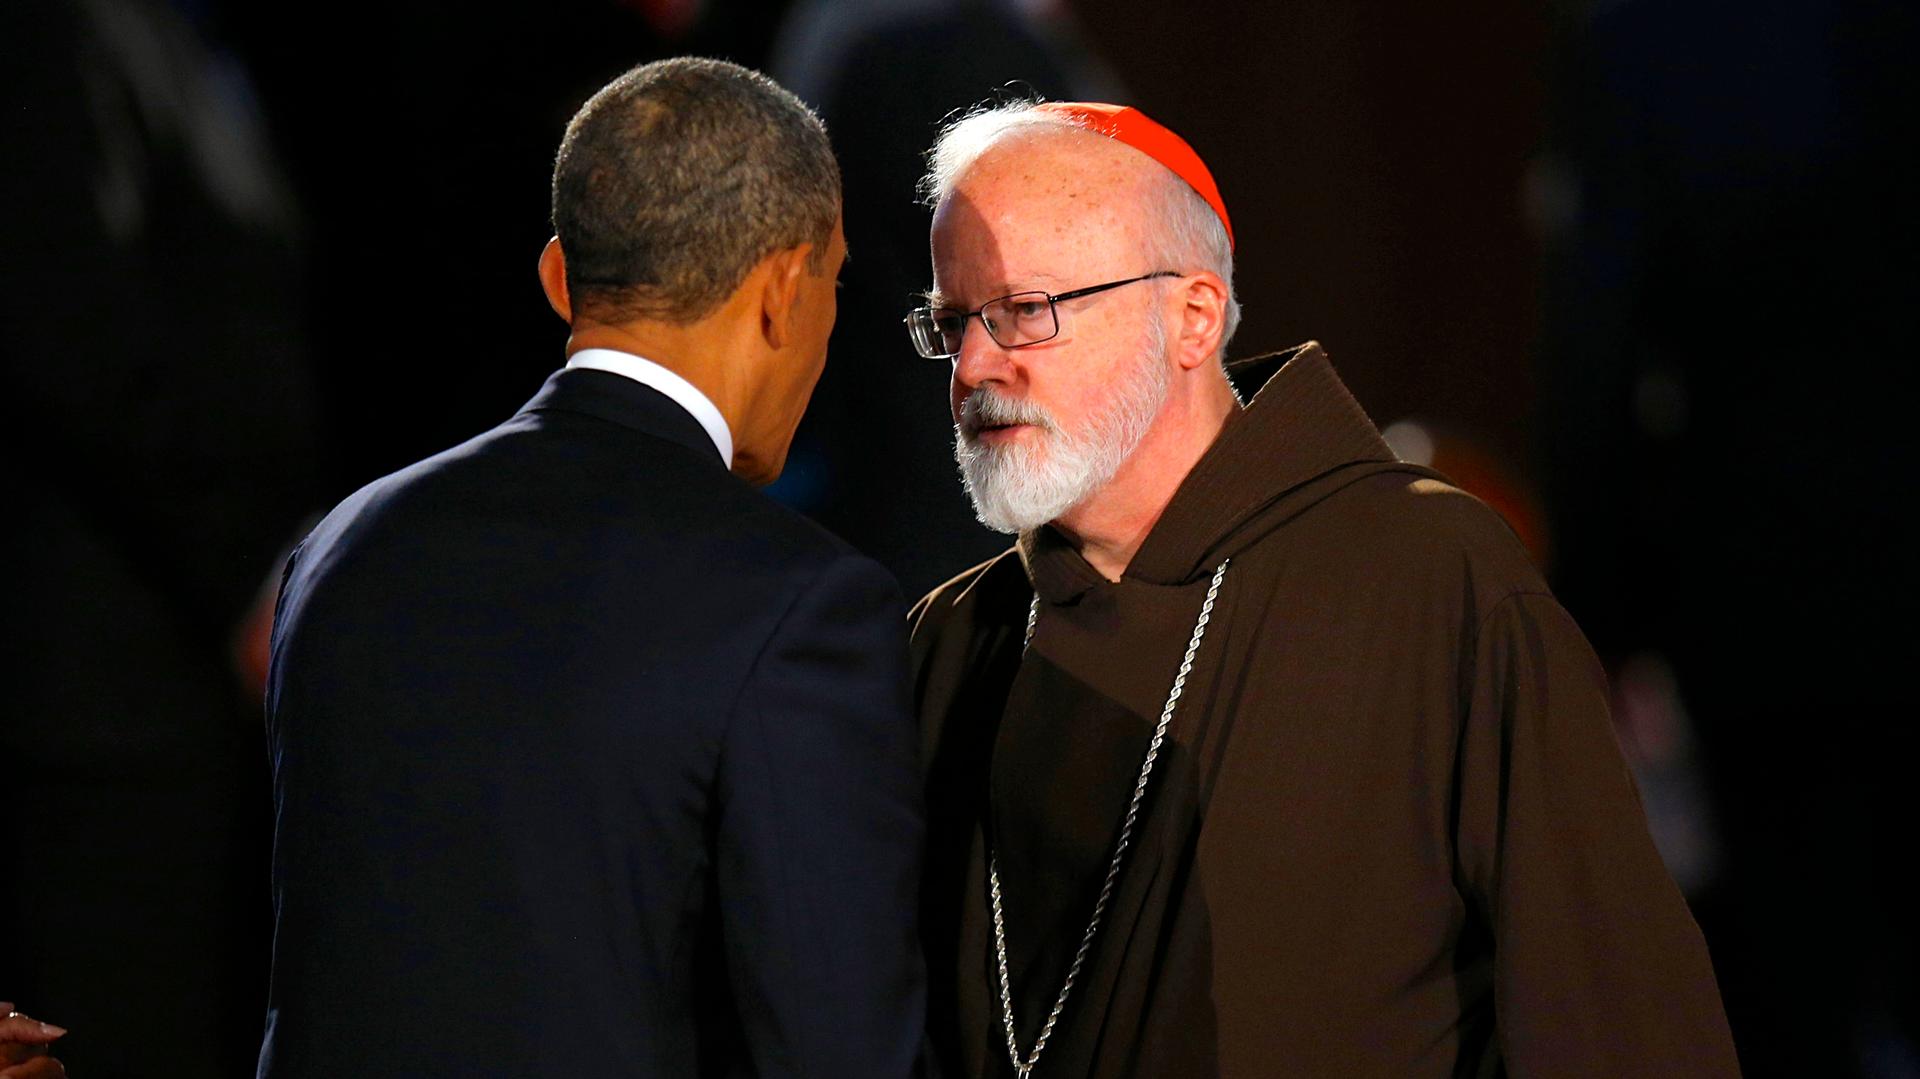 President Barack Obama talks to Cardinal Sean O'Malley during an interfaith memorial service for Boston Marathon bombing victims at Boston's Cathedral of the Holy Cross on April 18, 2013.